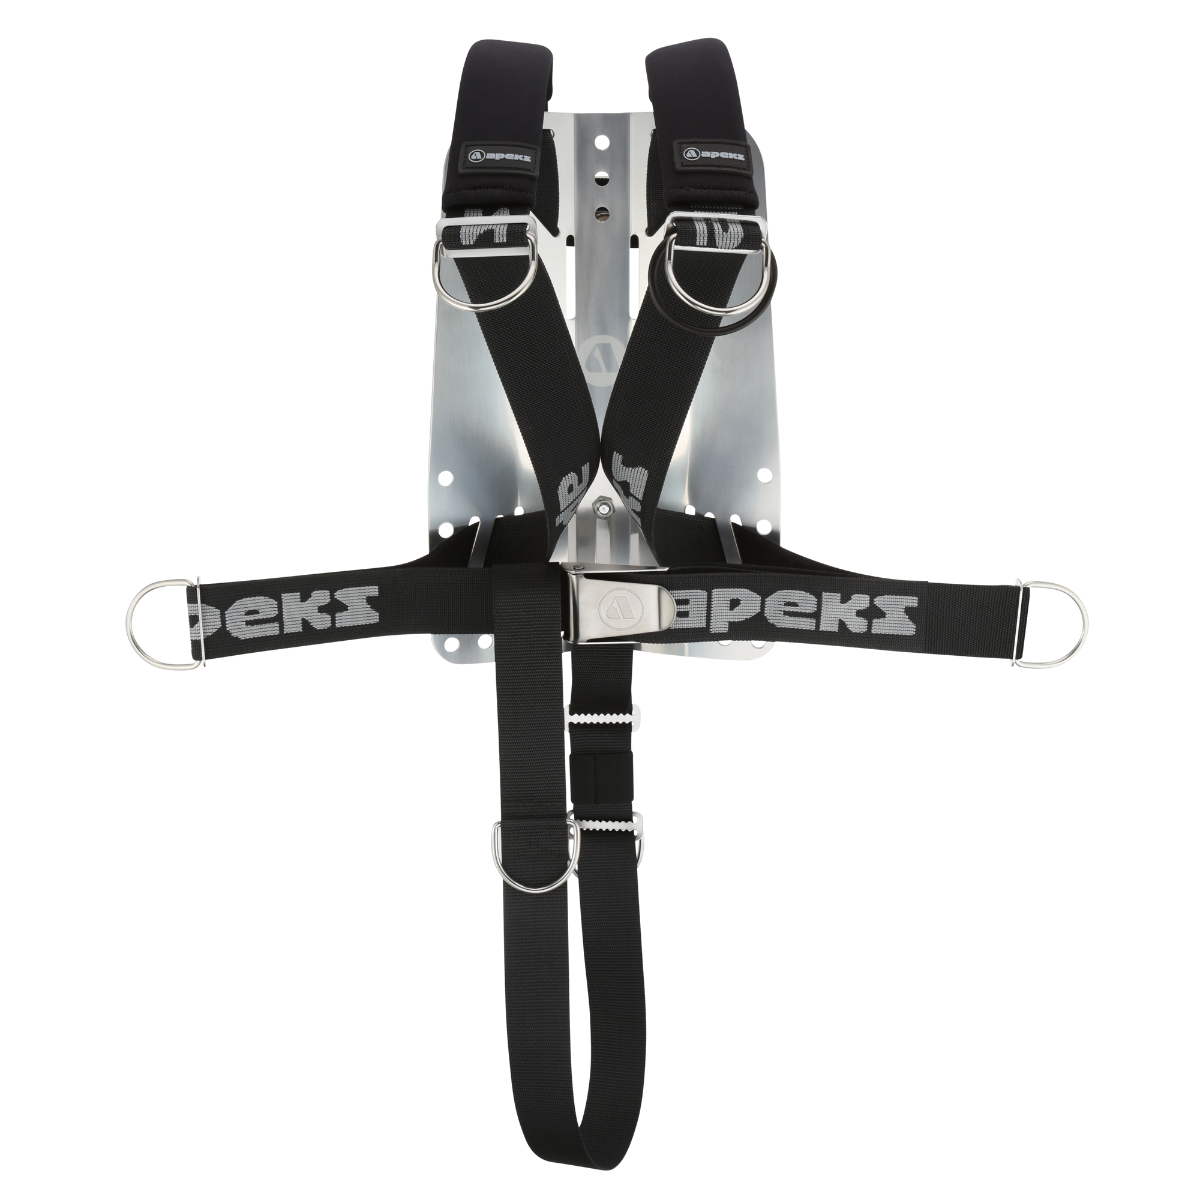 APEKS DLX HARNESS WITH STAINLESS STEEL BACKPLATE